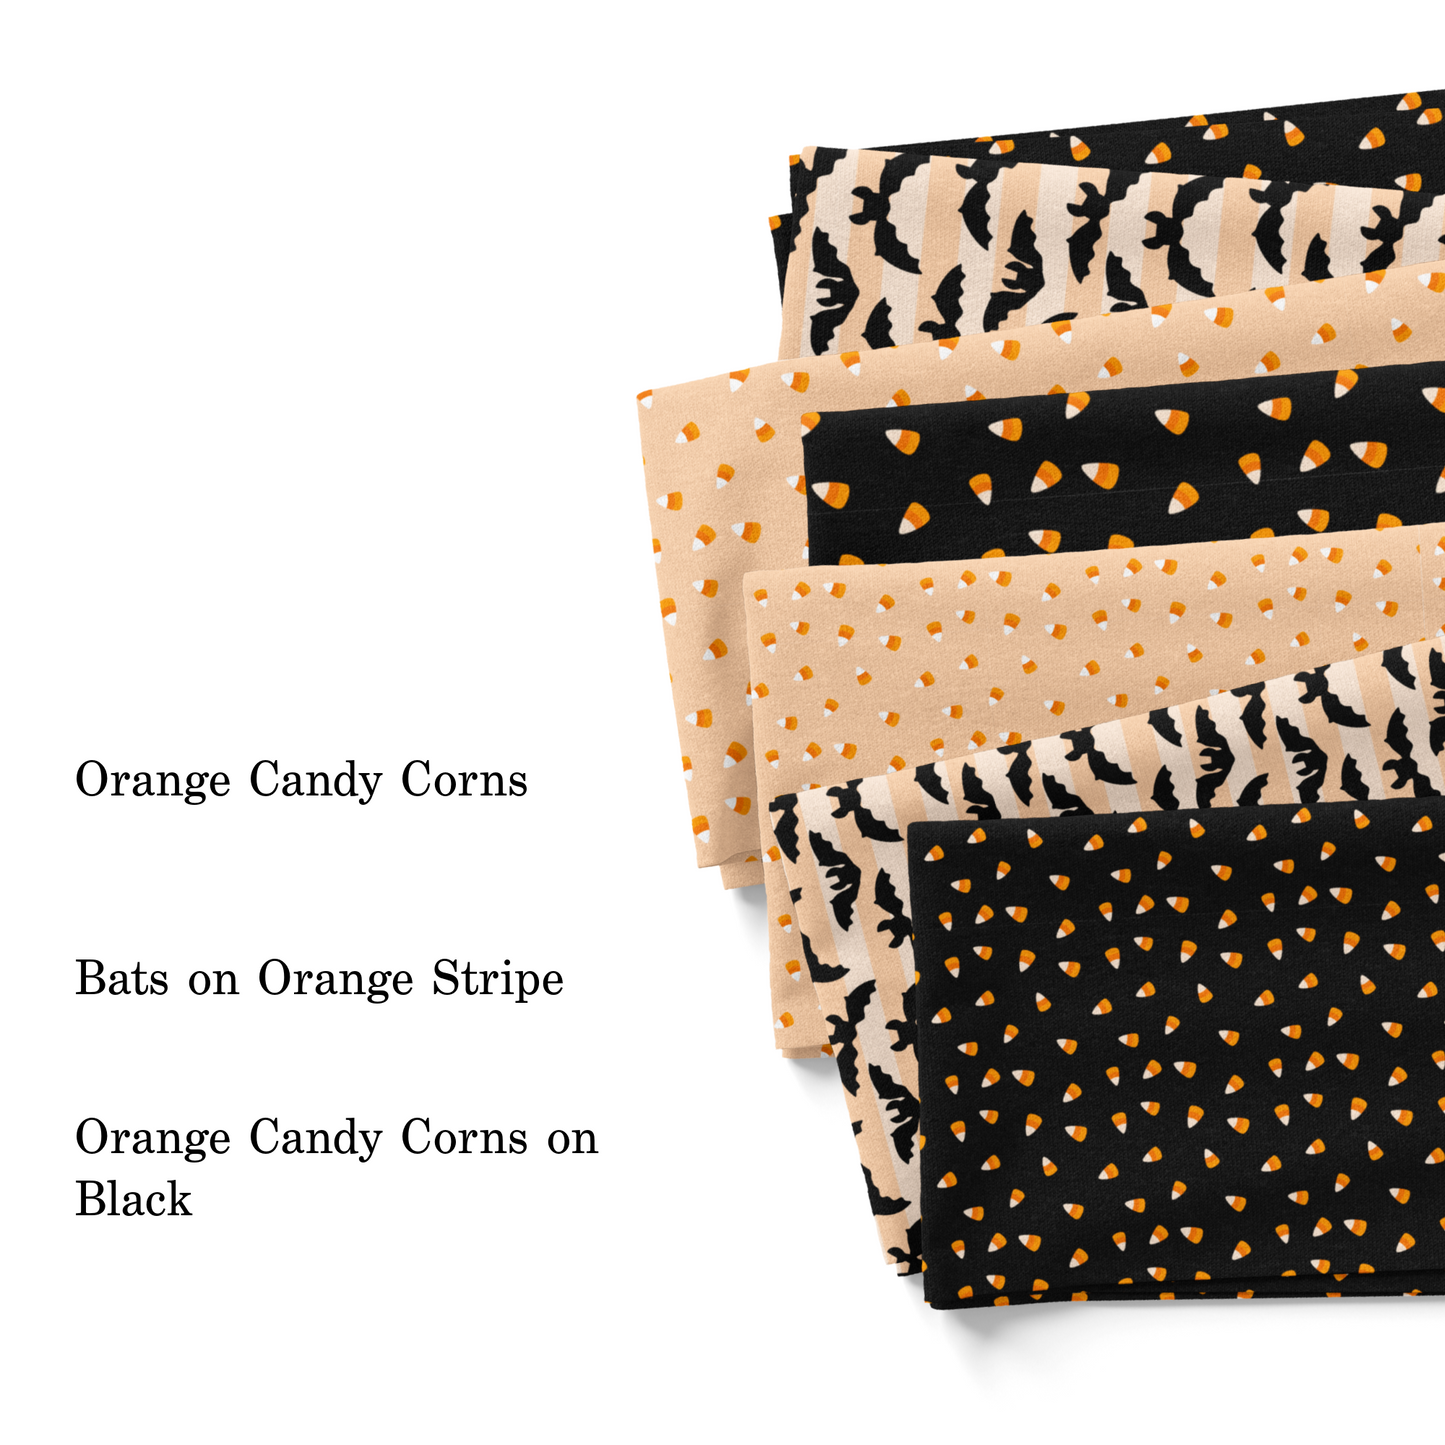 Orange and black themed Halloween fabric swatches.